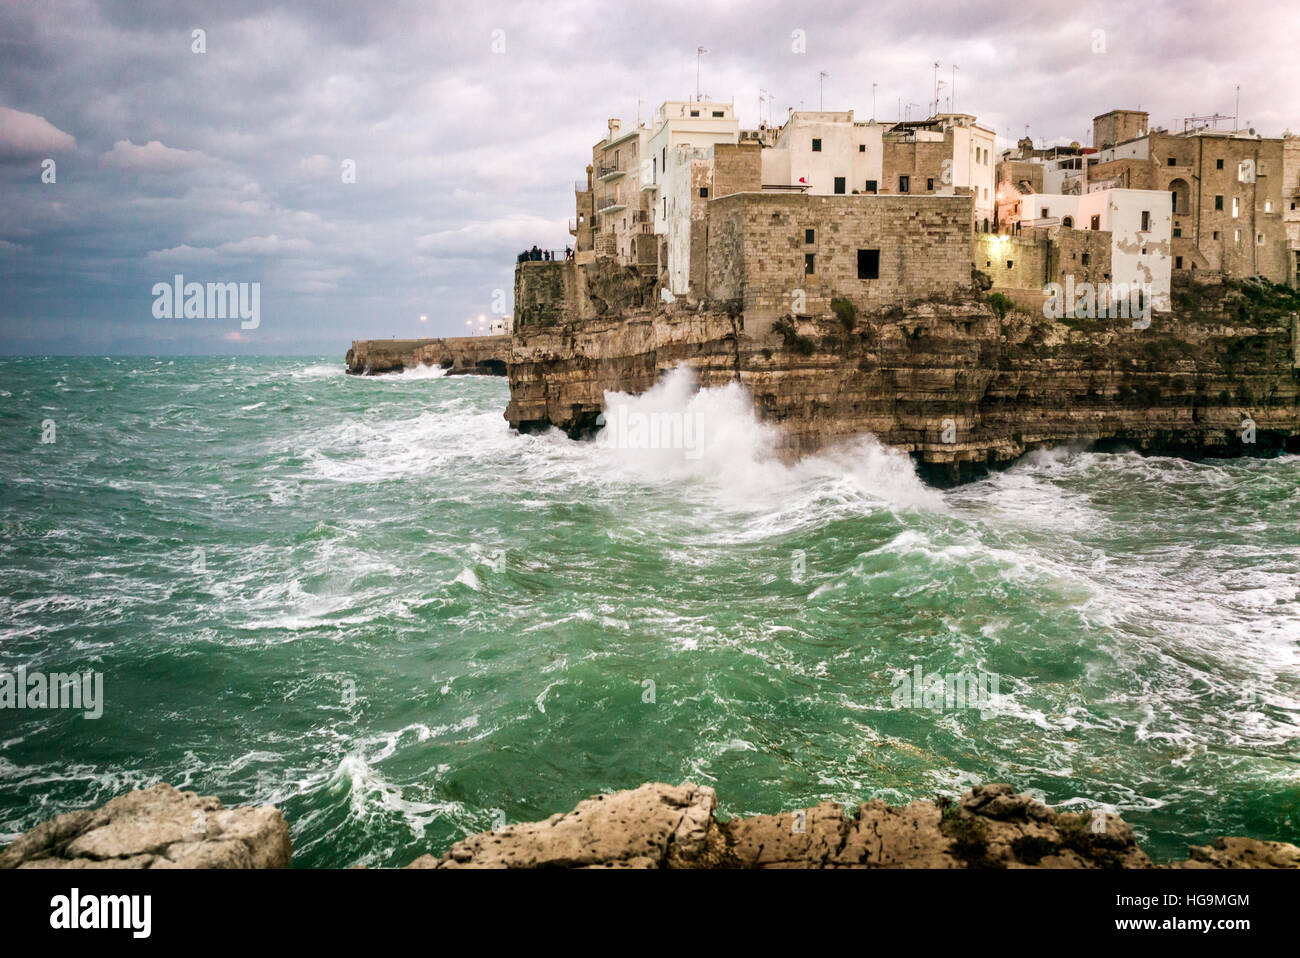 Polignano a Mare, the amazing village on the rocks, along the seaside in Puglia, south of Italy Stock Photo